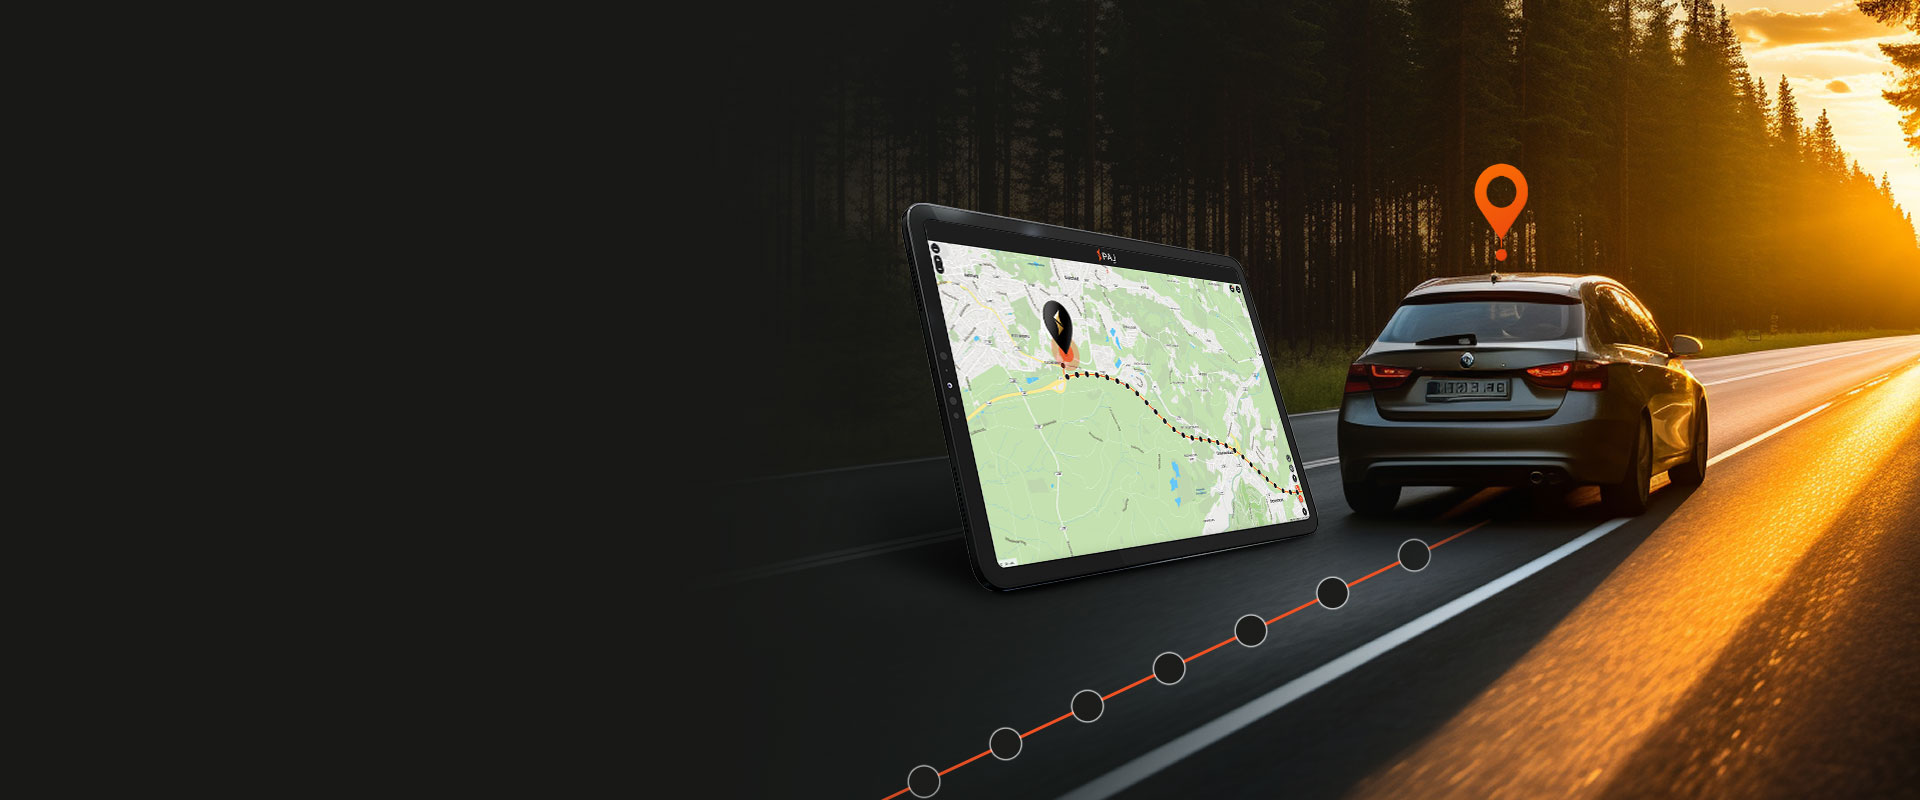 a-moving-car-on-the-road-which-has-a-GPS-Tracker-installed-in-it